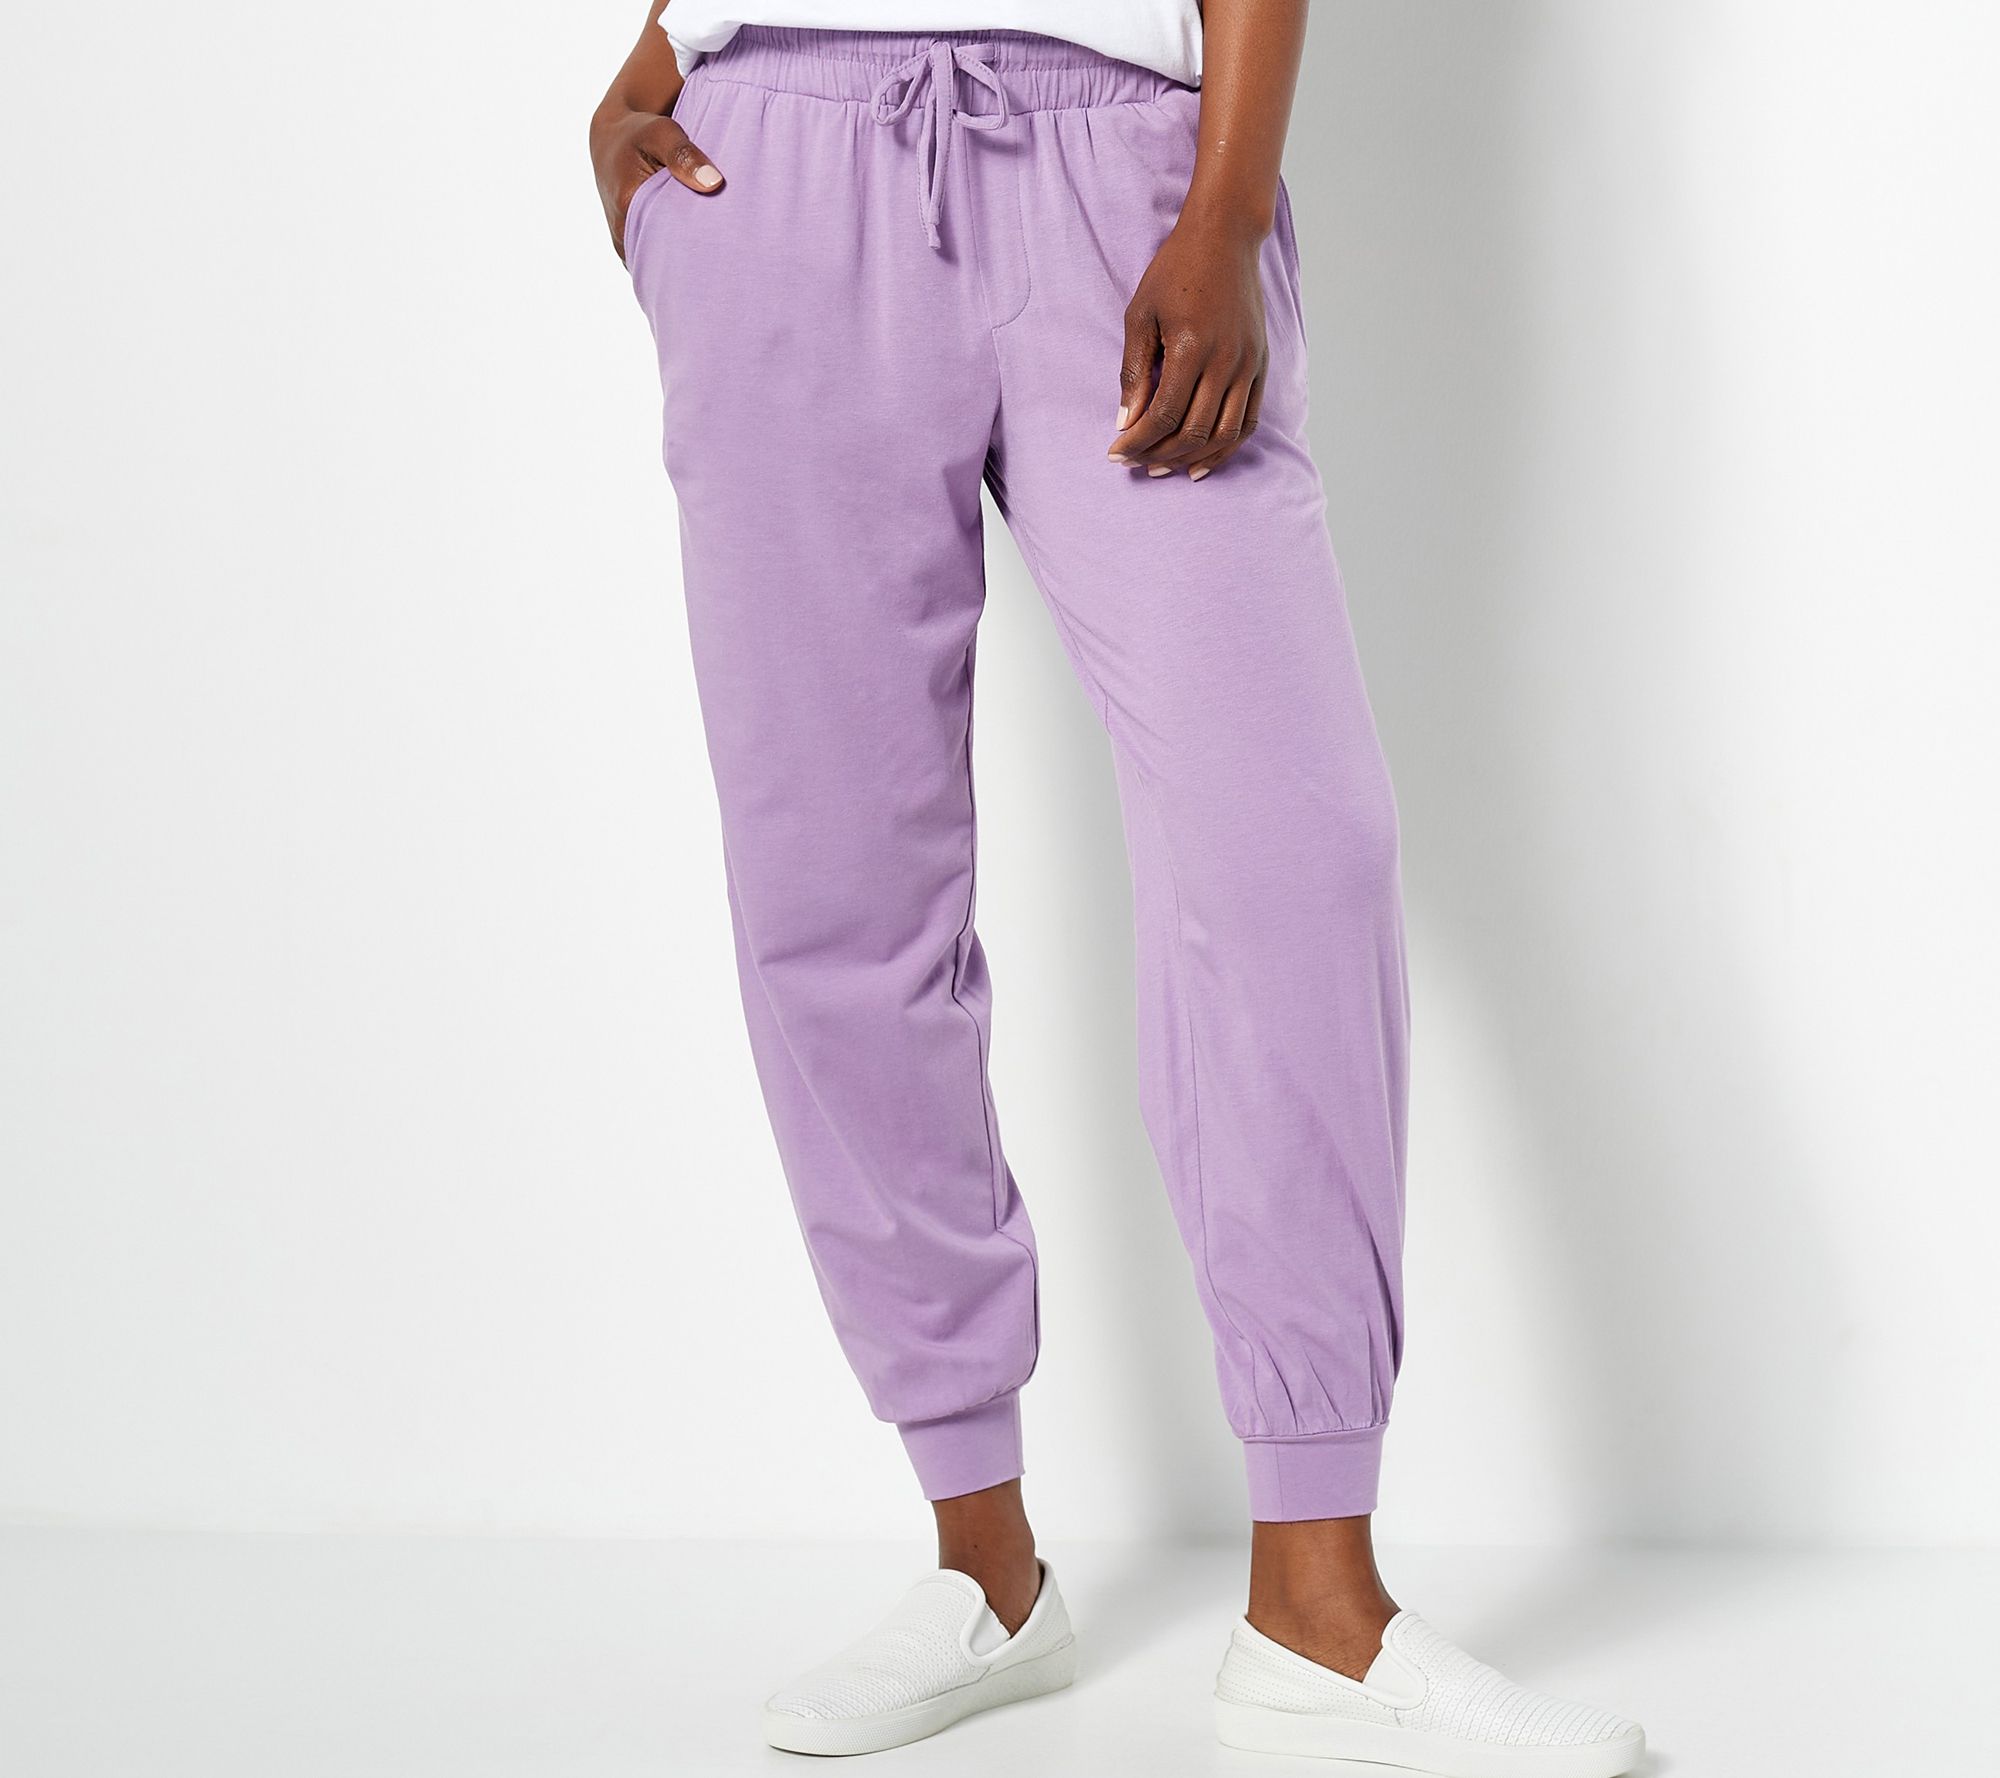 AnyBody Cozy Knit Luxe Jogger Pant - QVC.com